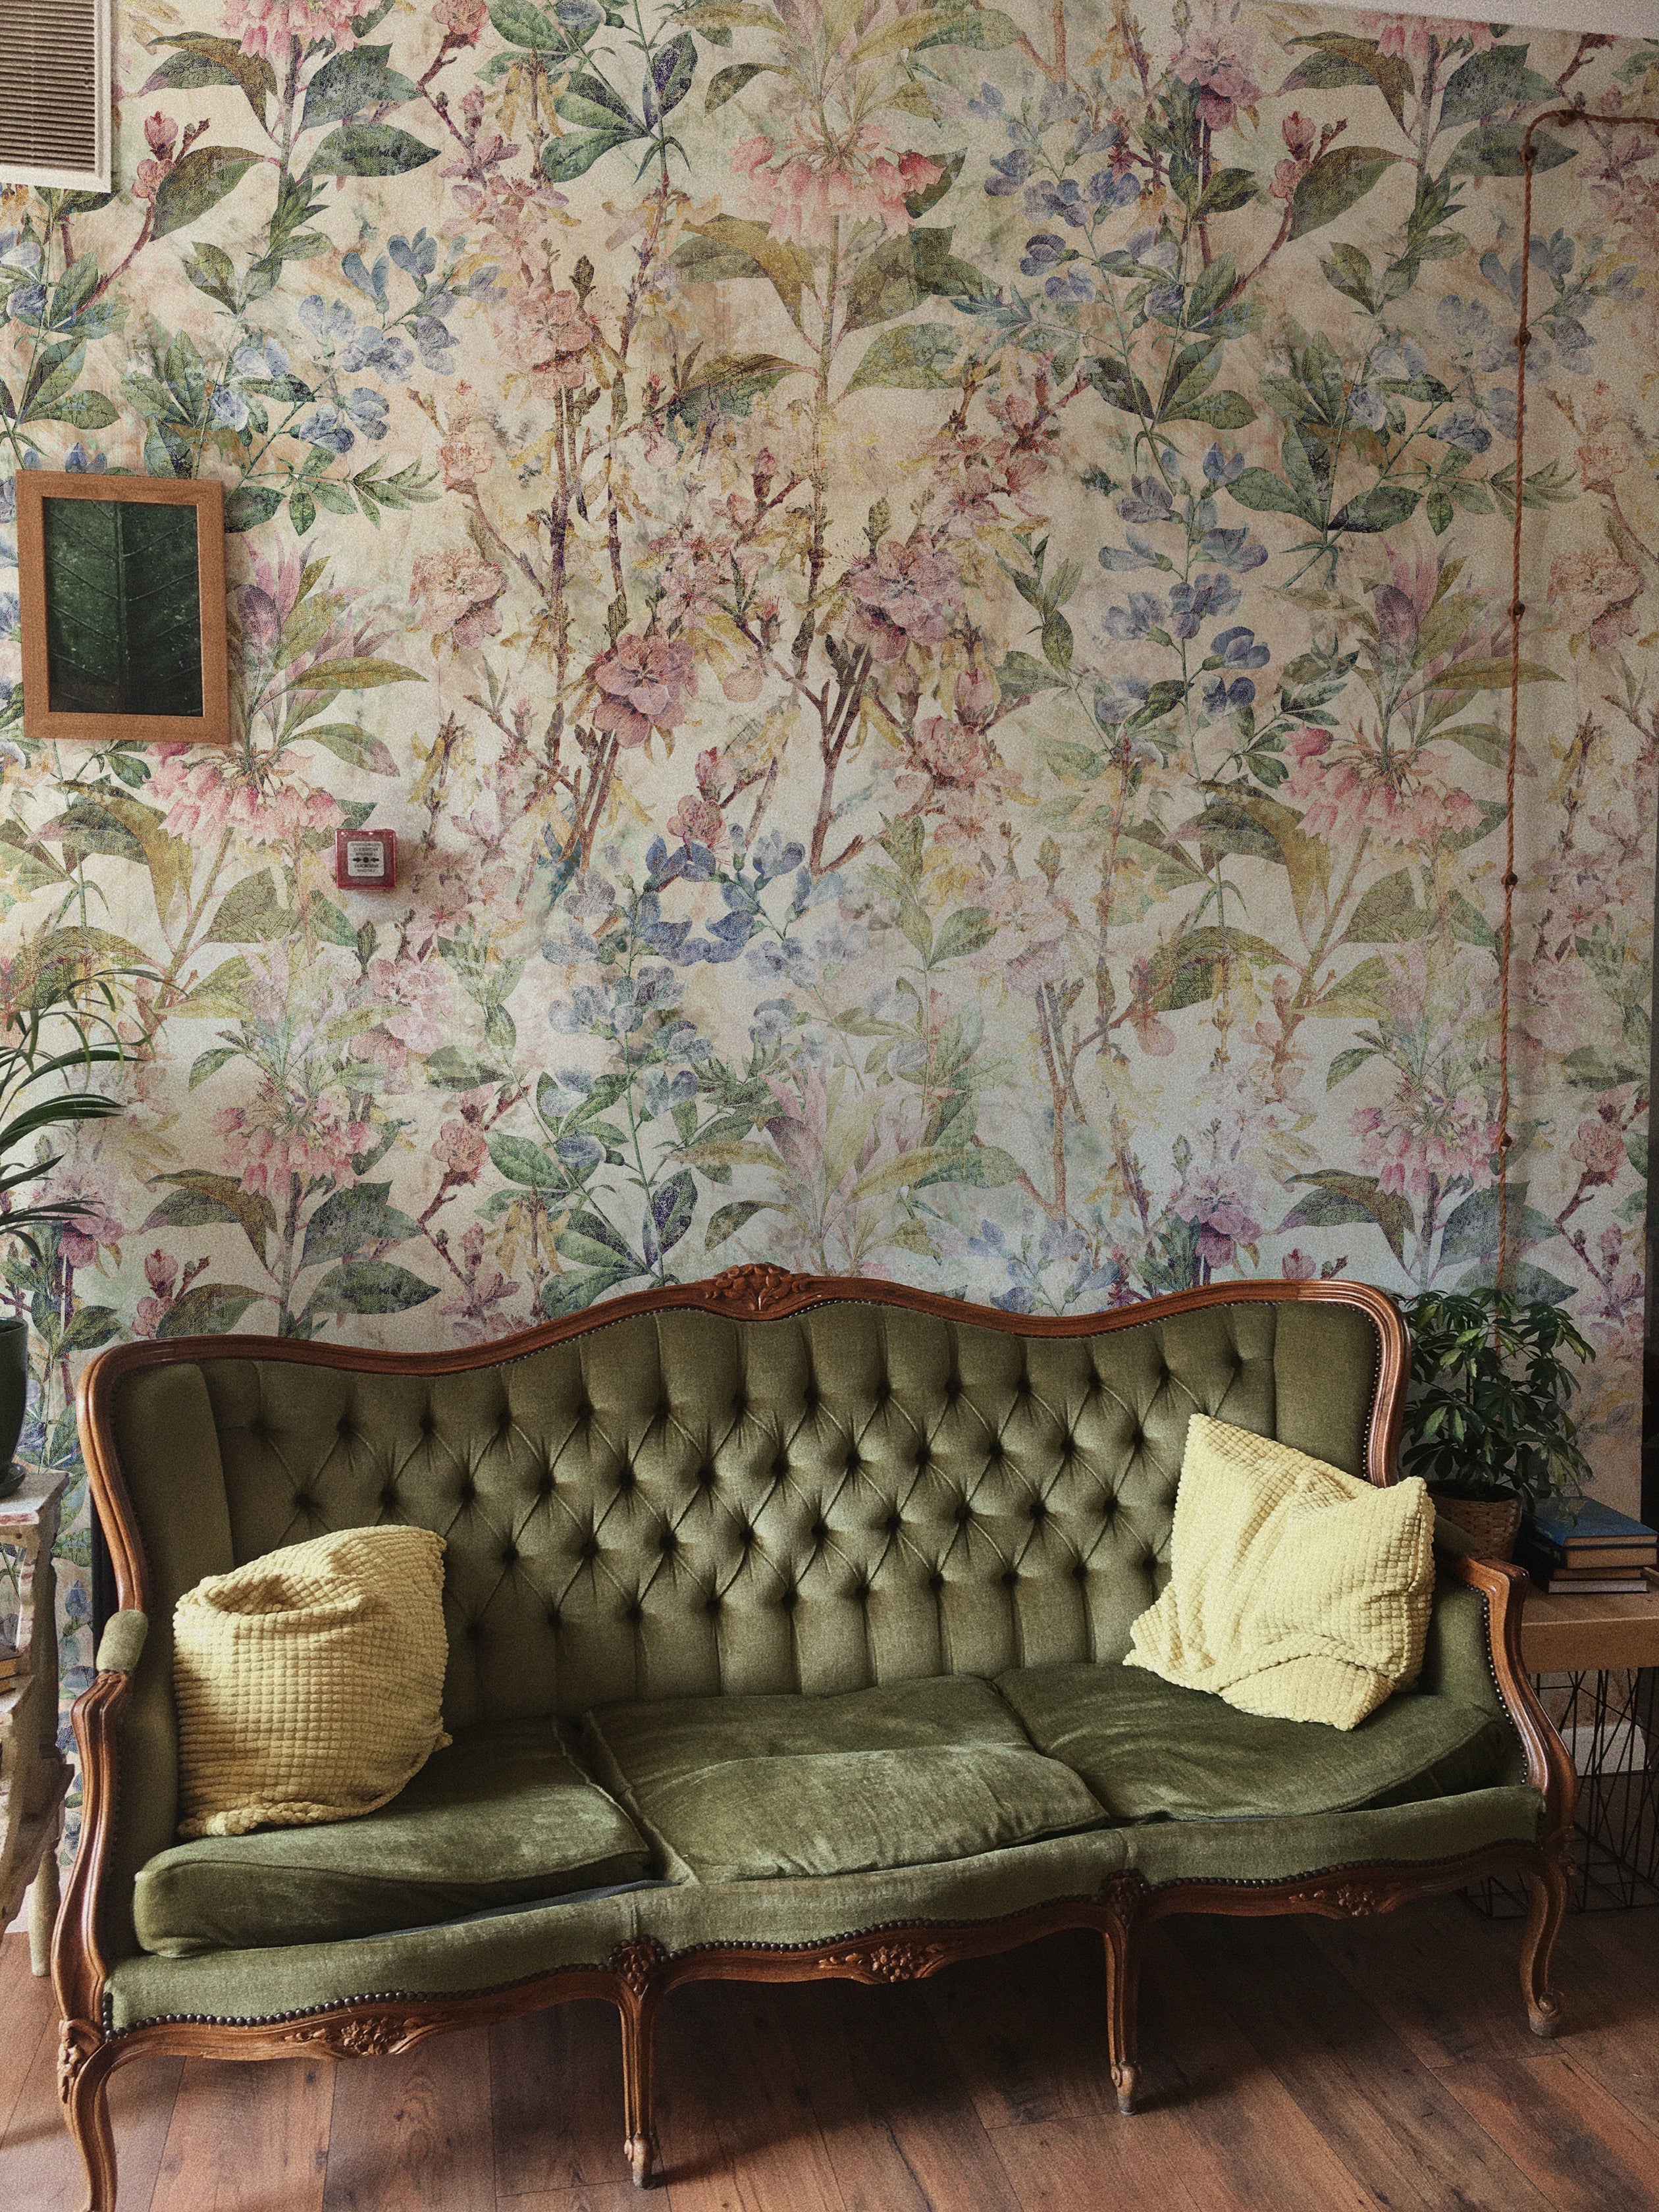 A stylish interior showcasing the "Ancient Florals Wallpaper," creating a rich, textural backdrop for a vintage green tufted sofa adorned with yellow cushions. The room's ambiance reflects a harmonious blend of classic and contemporary styles, highlighted by the intricate floral patterns.